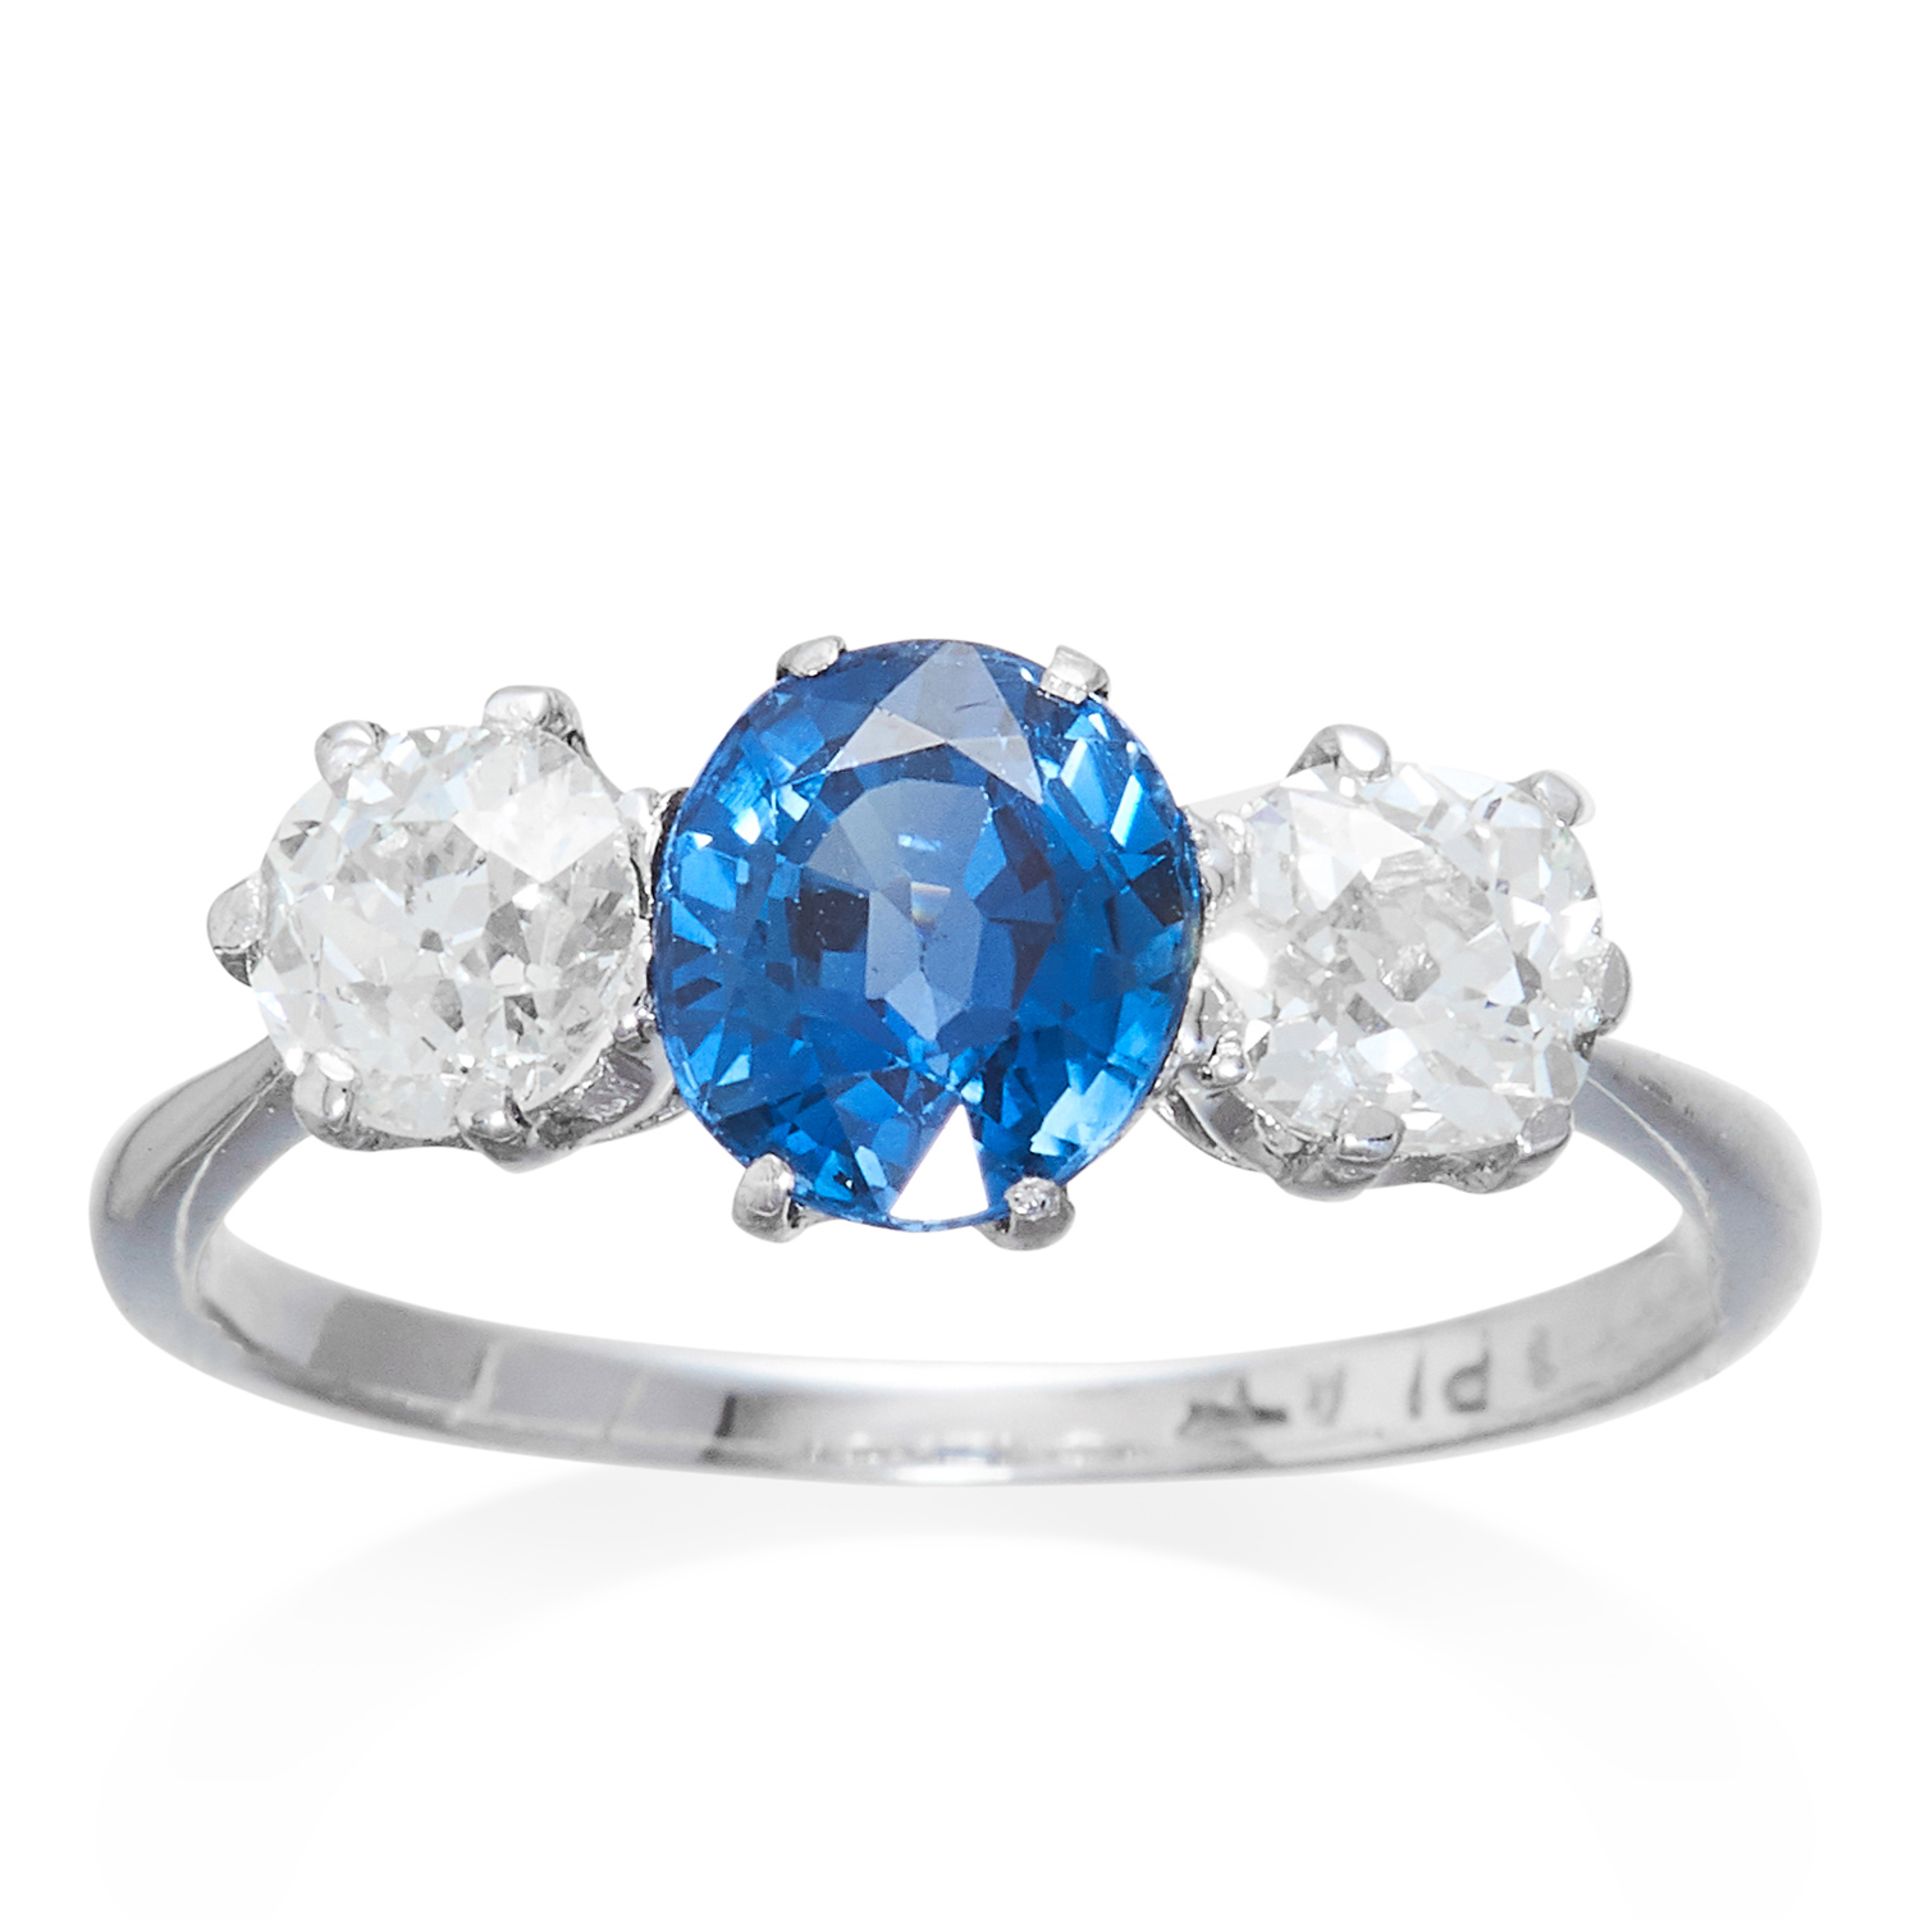 AN ANTIQUE SAPPHIRE AND DIAMOND THREE STONE RING in platinum, the central oval cut sapphire of 1.